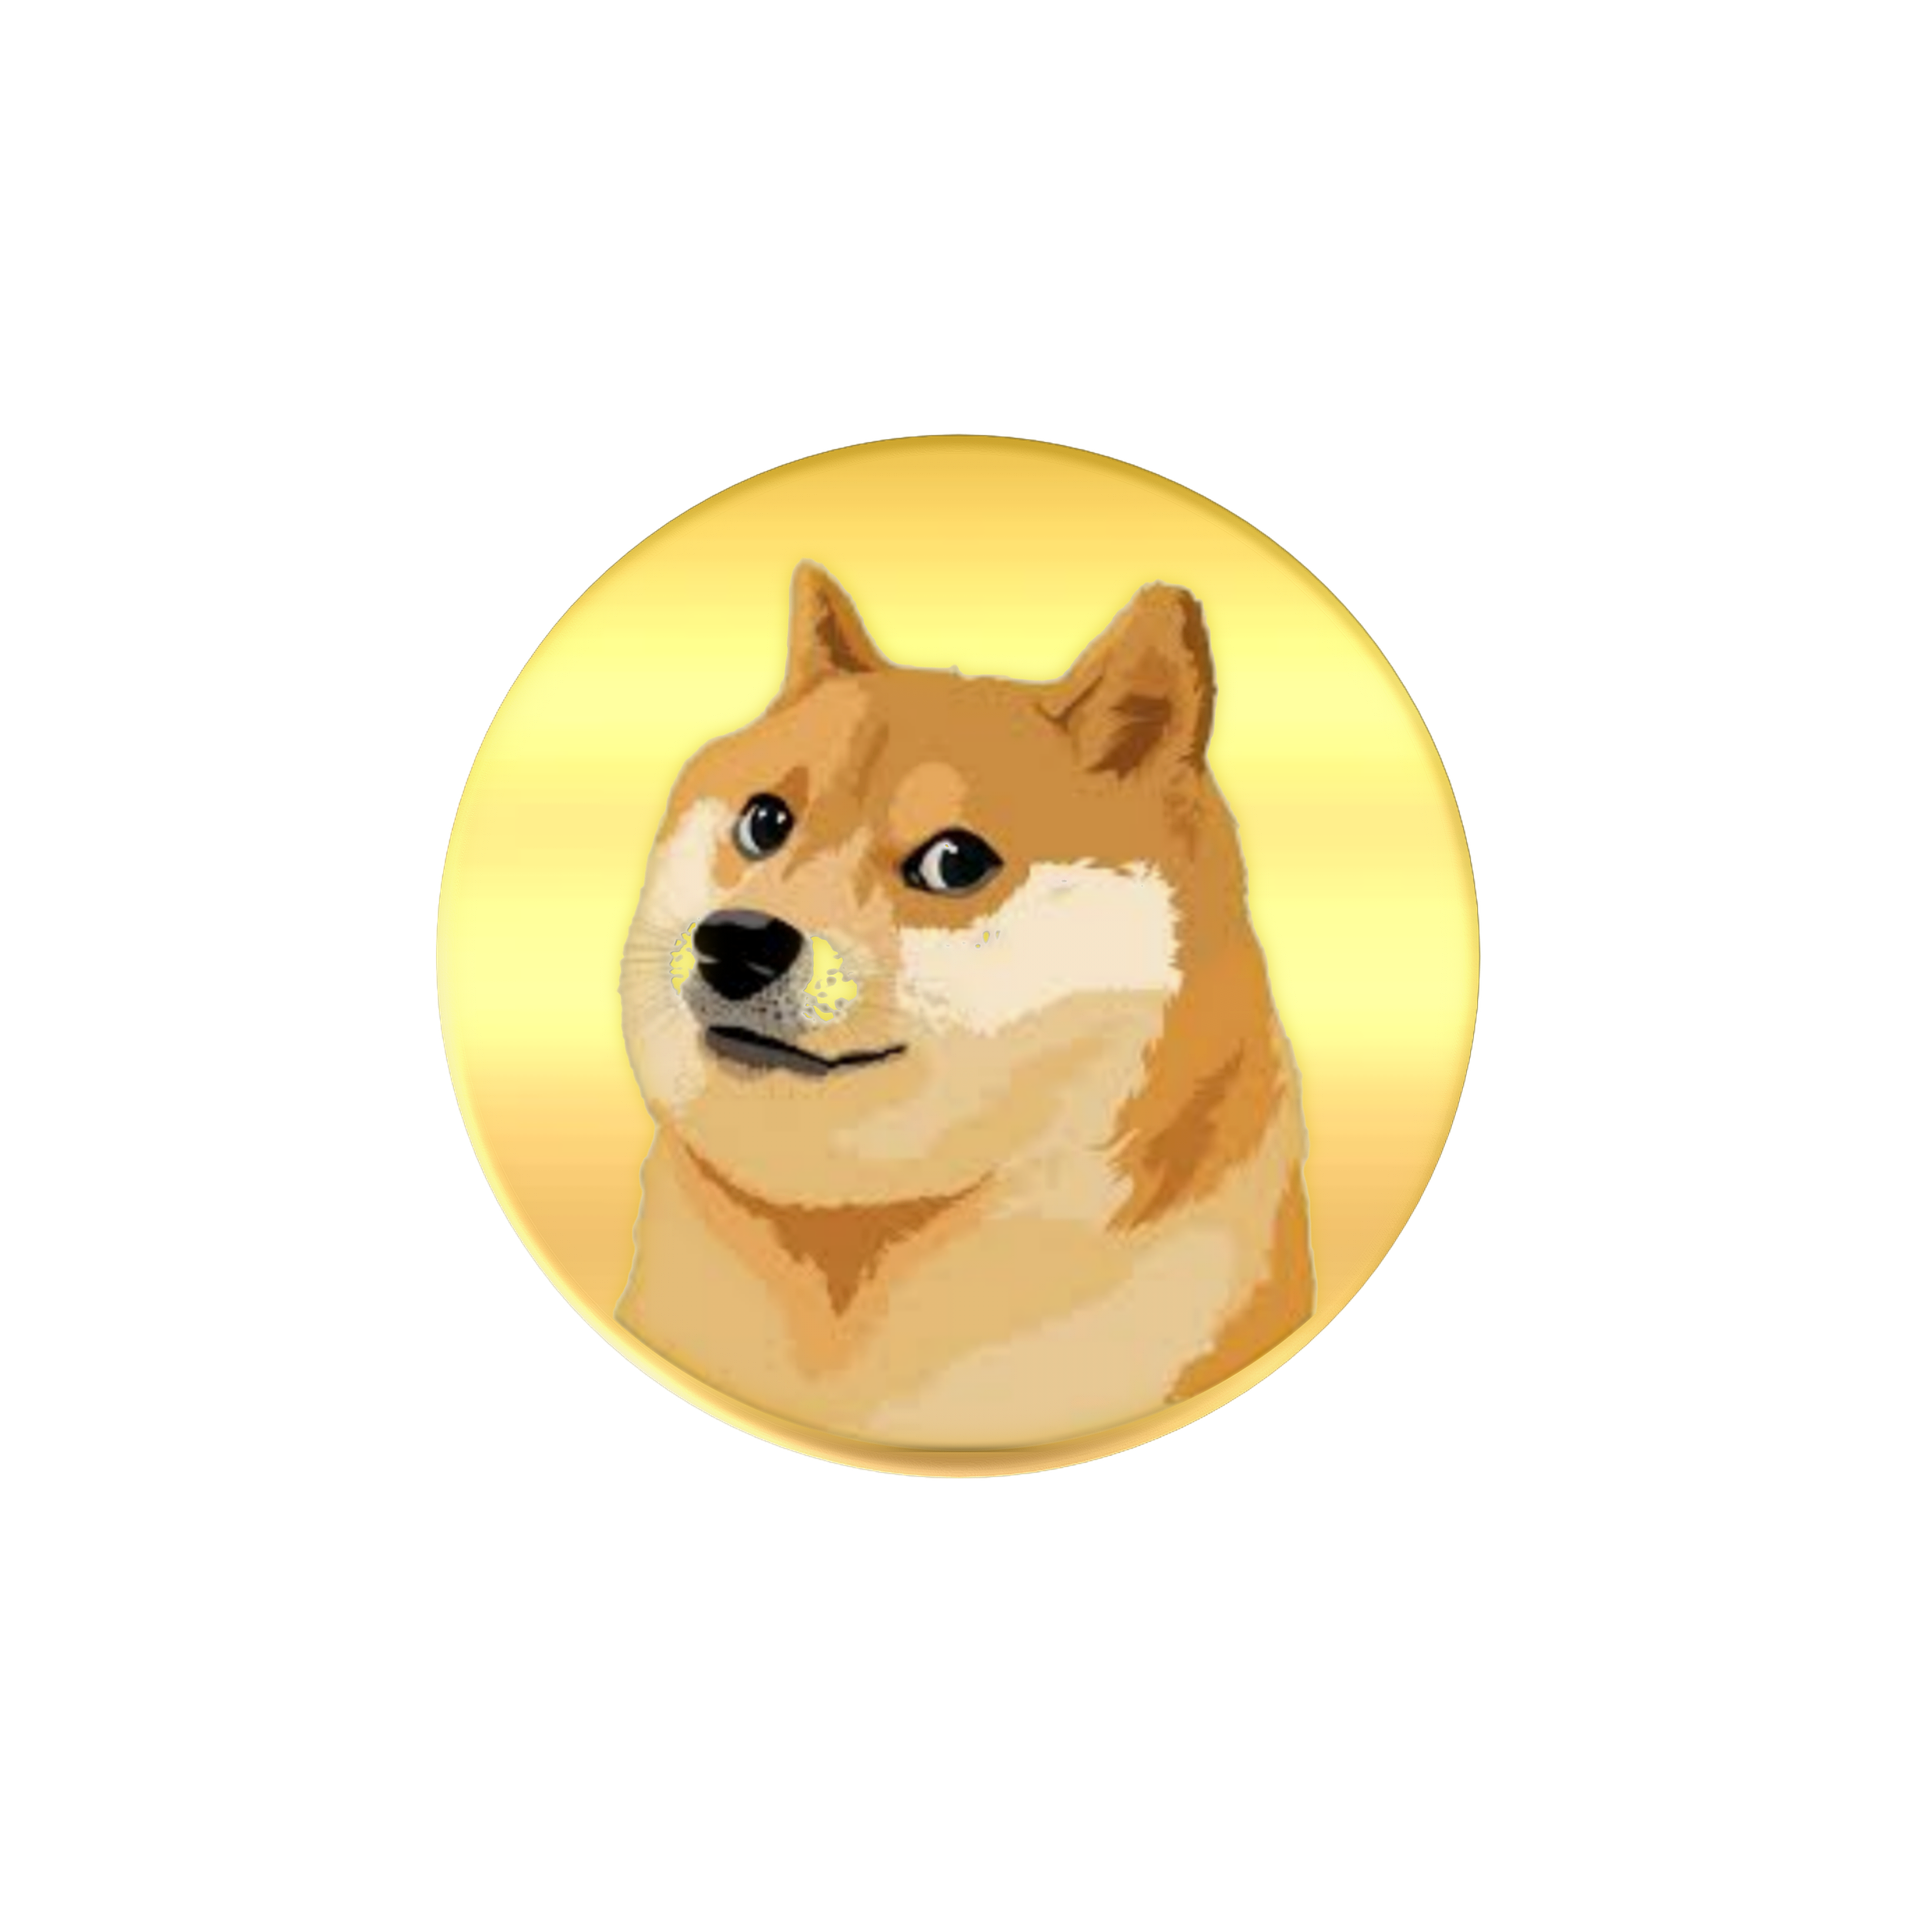 IS DOGECOIN WORTH MINING?